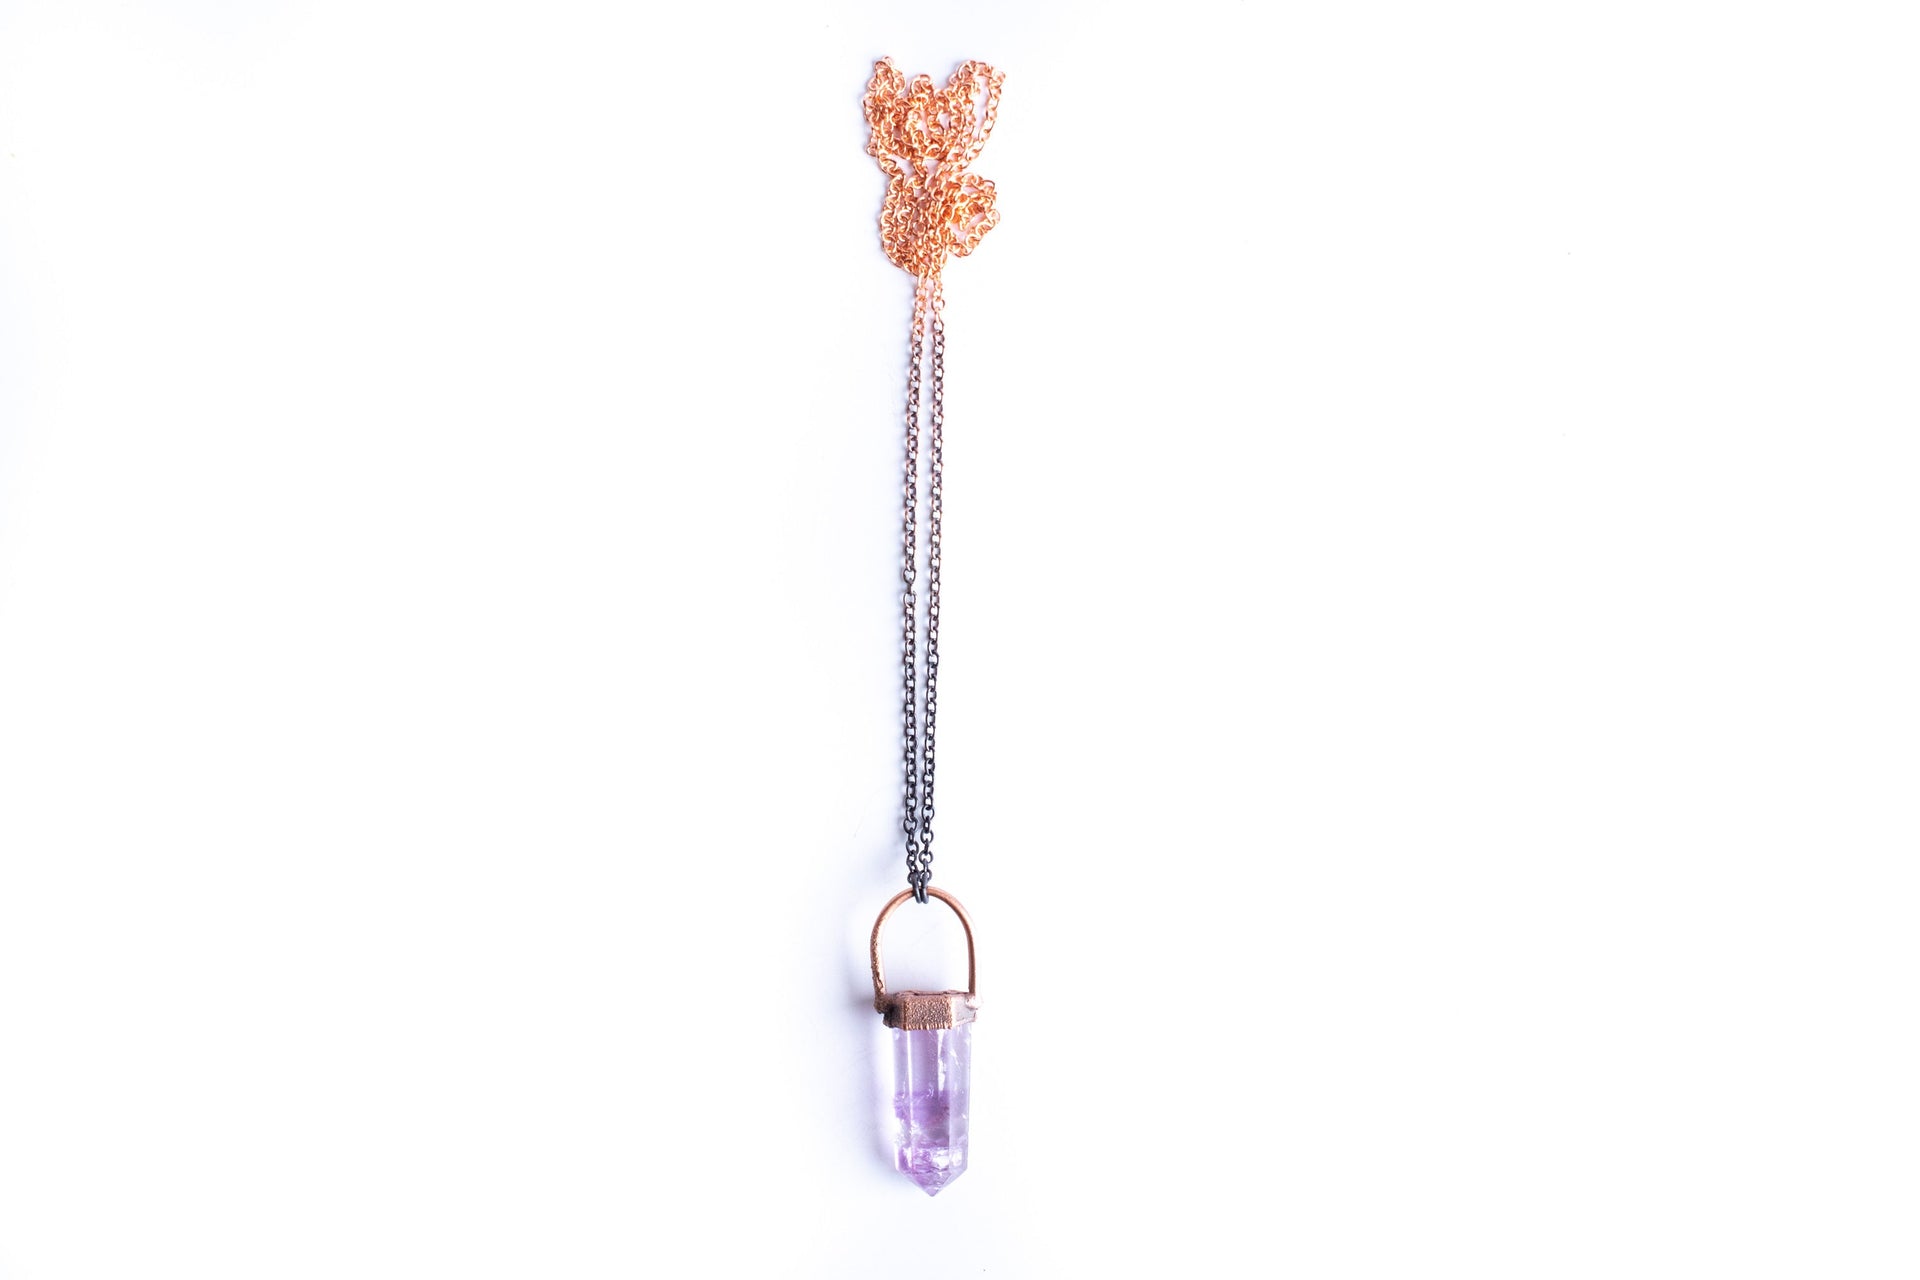 Amethyst necklace | Polished amethyst necklace